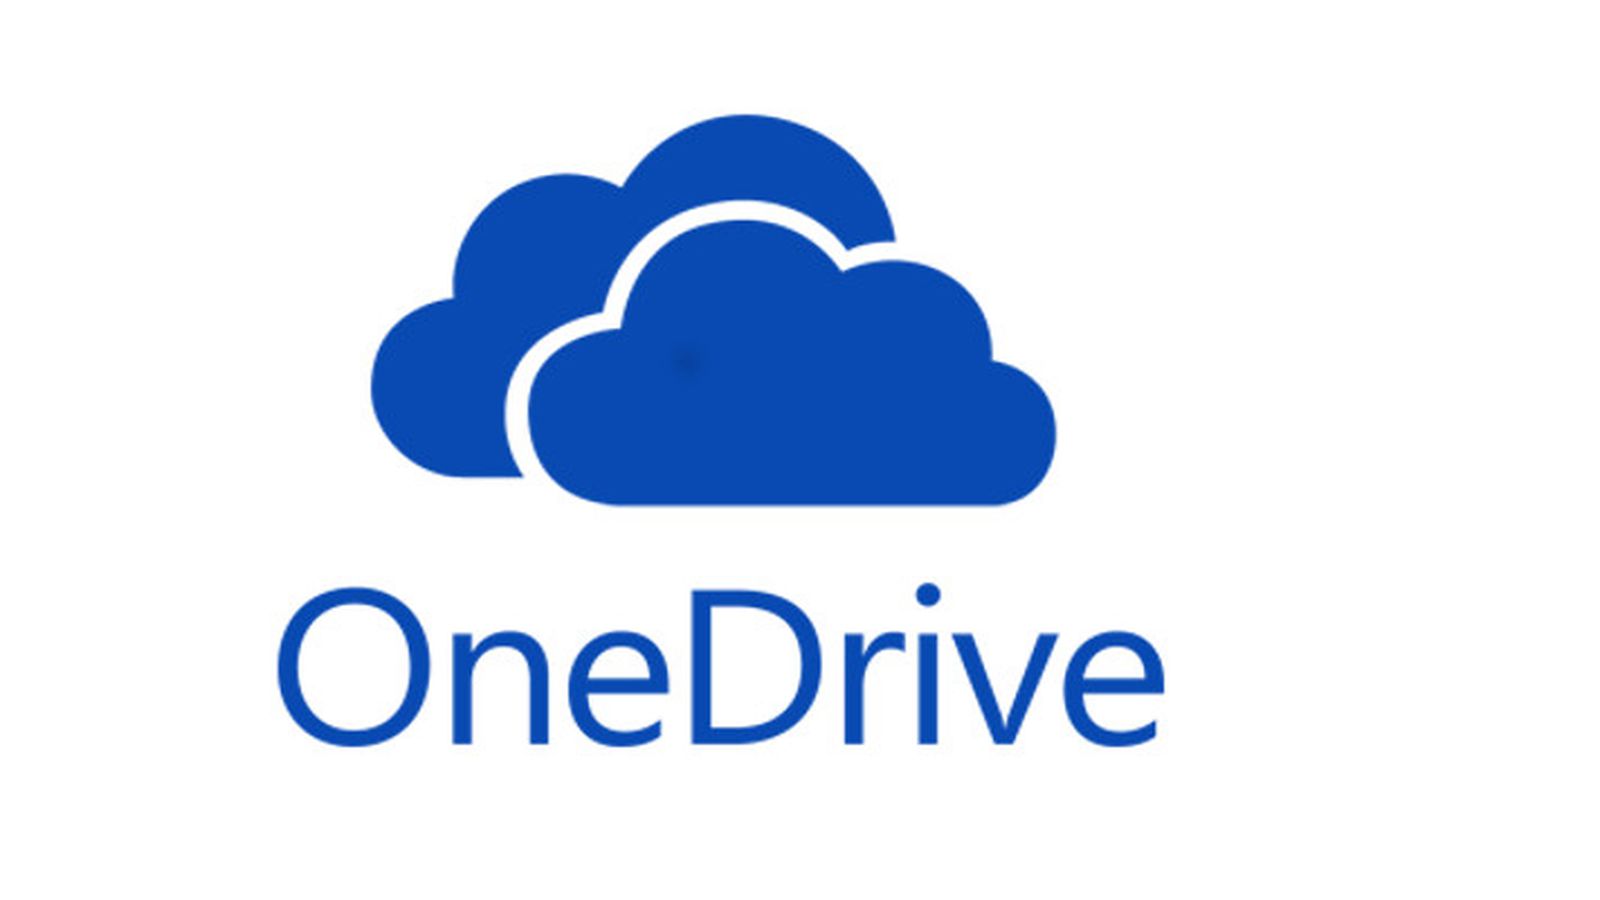 Microsoft Onedrive Gains Native Support For Apple Silicon Macs - Macrumors